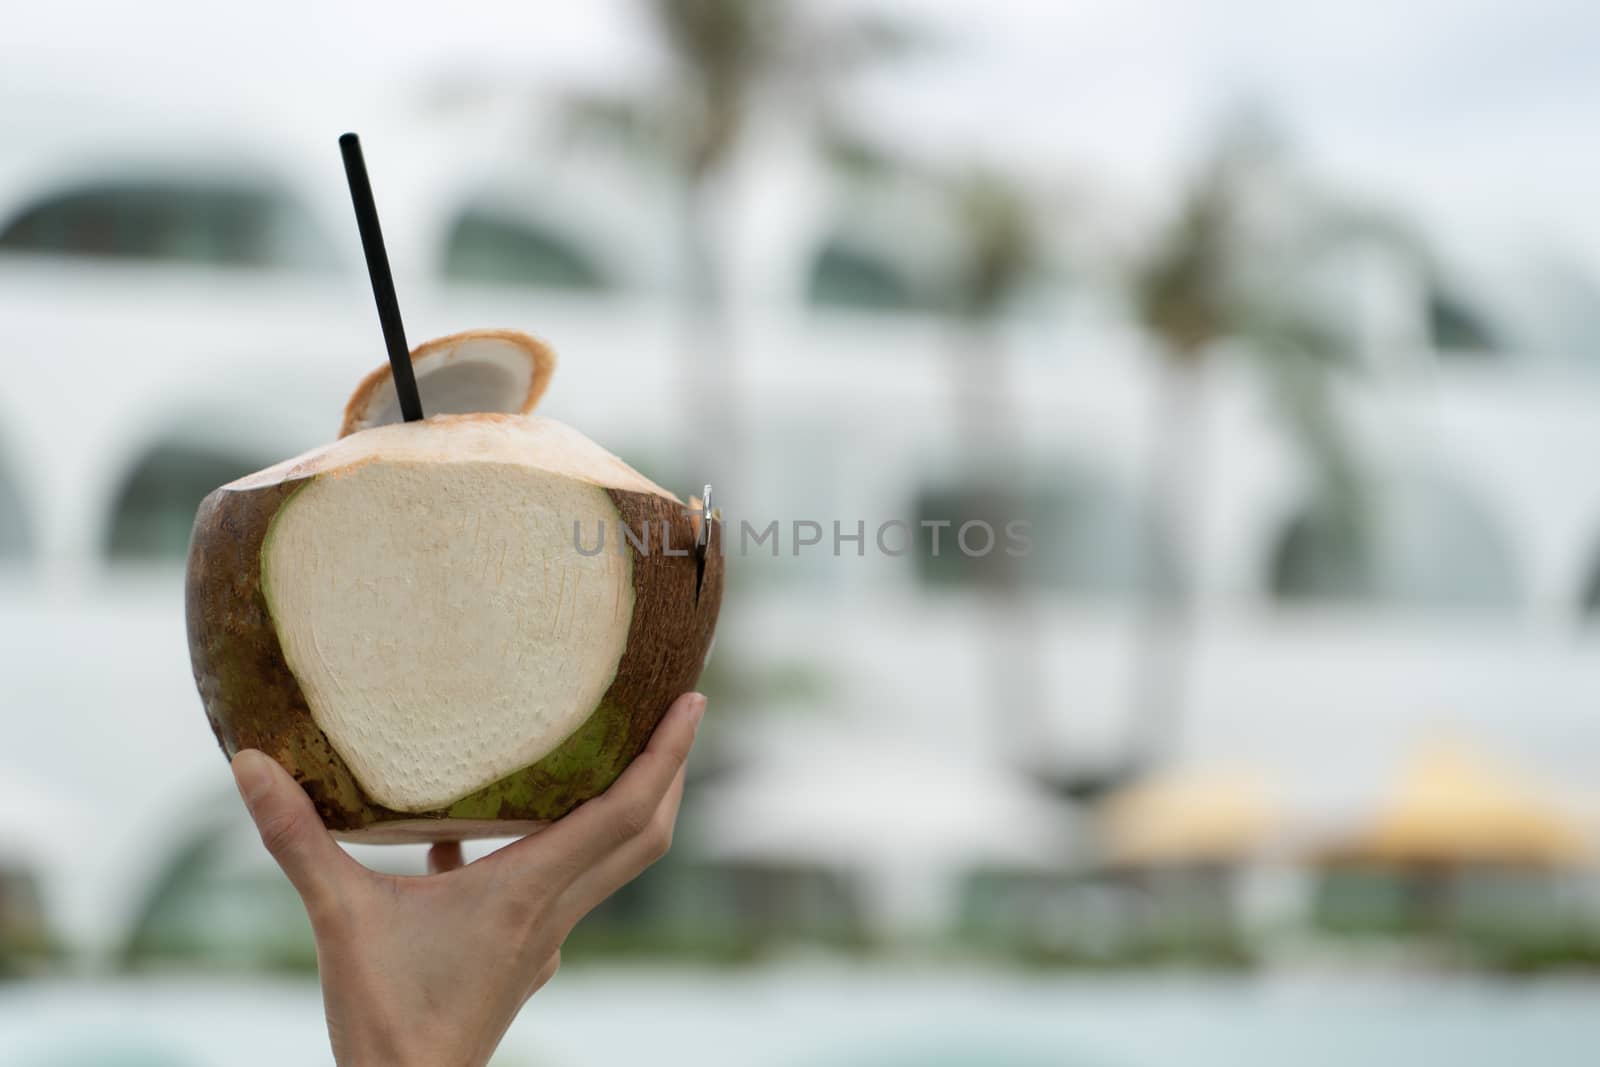 Fresh young coconut juice with straw, hand holding over blurred background.